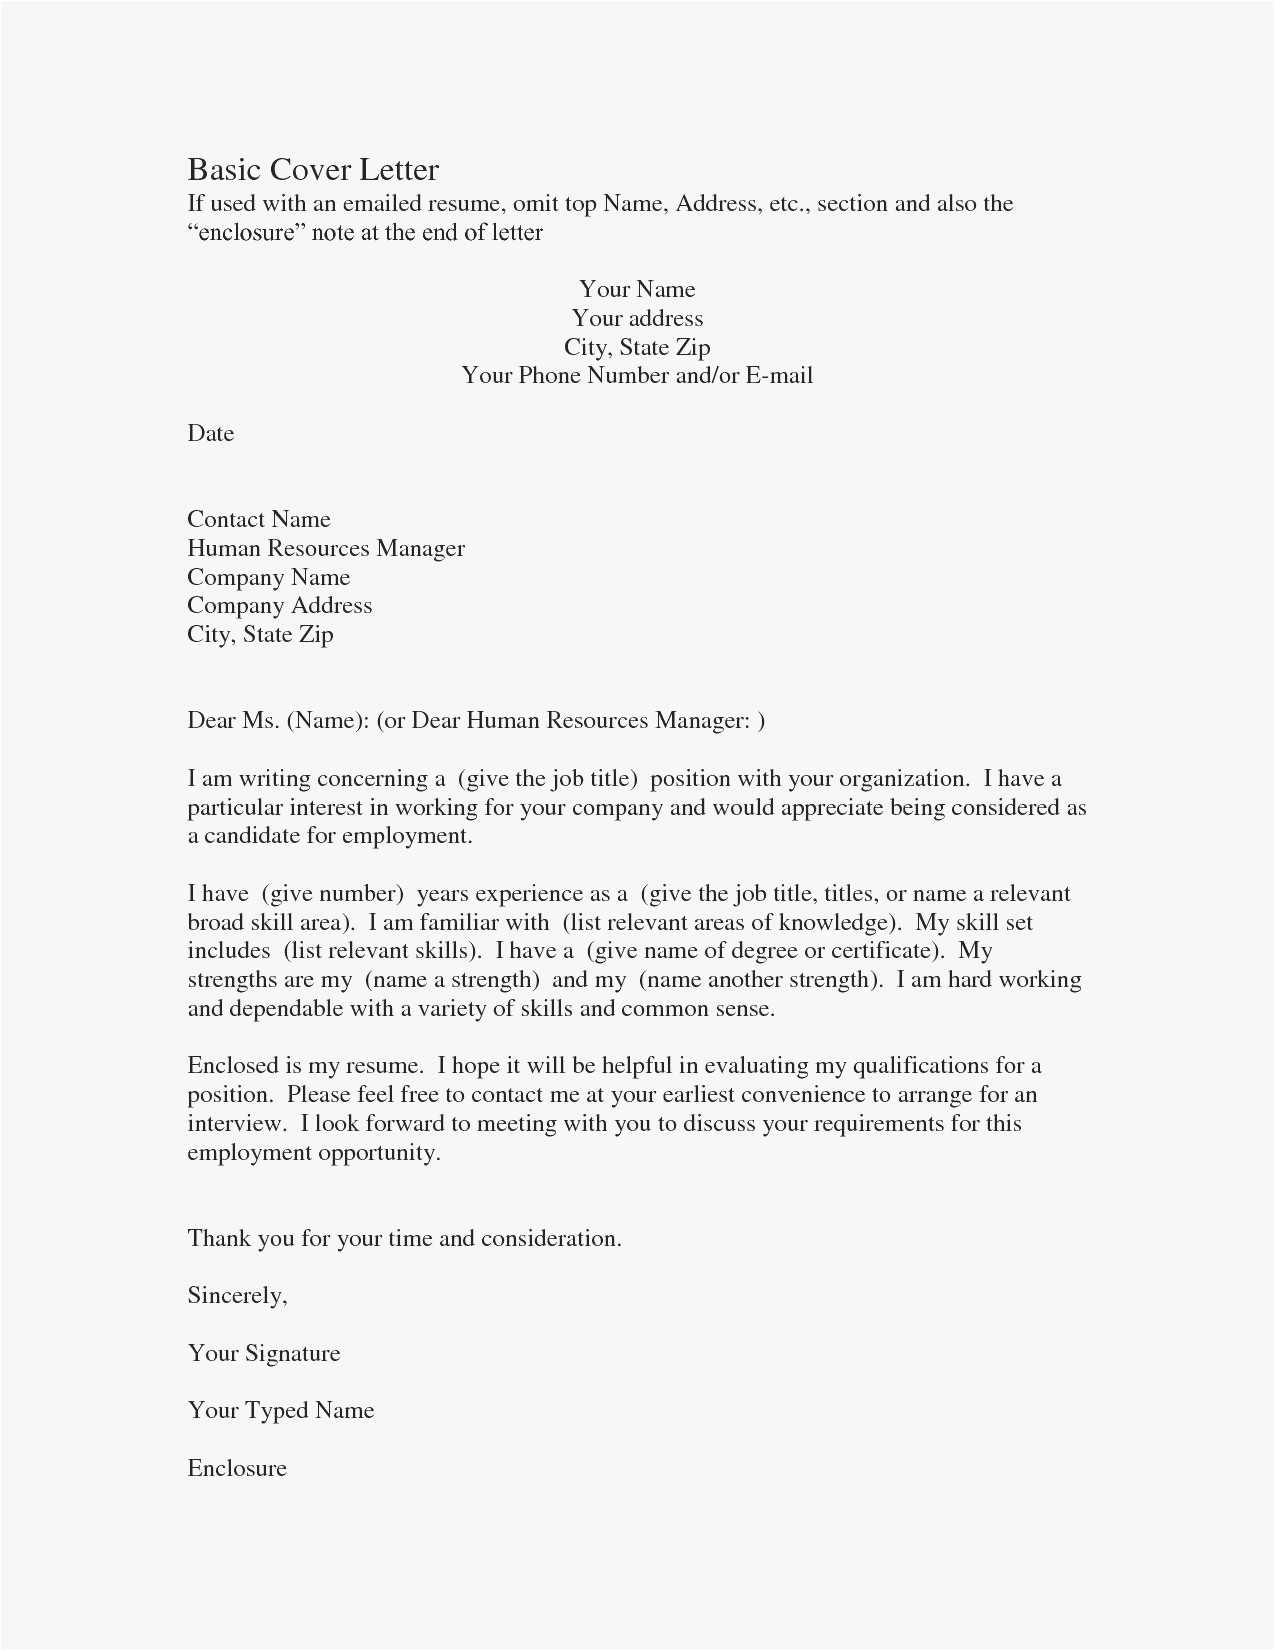 business thank you letter examples thank you cover letter examples of business thank you letter examples jpg